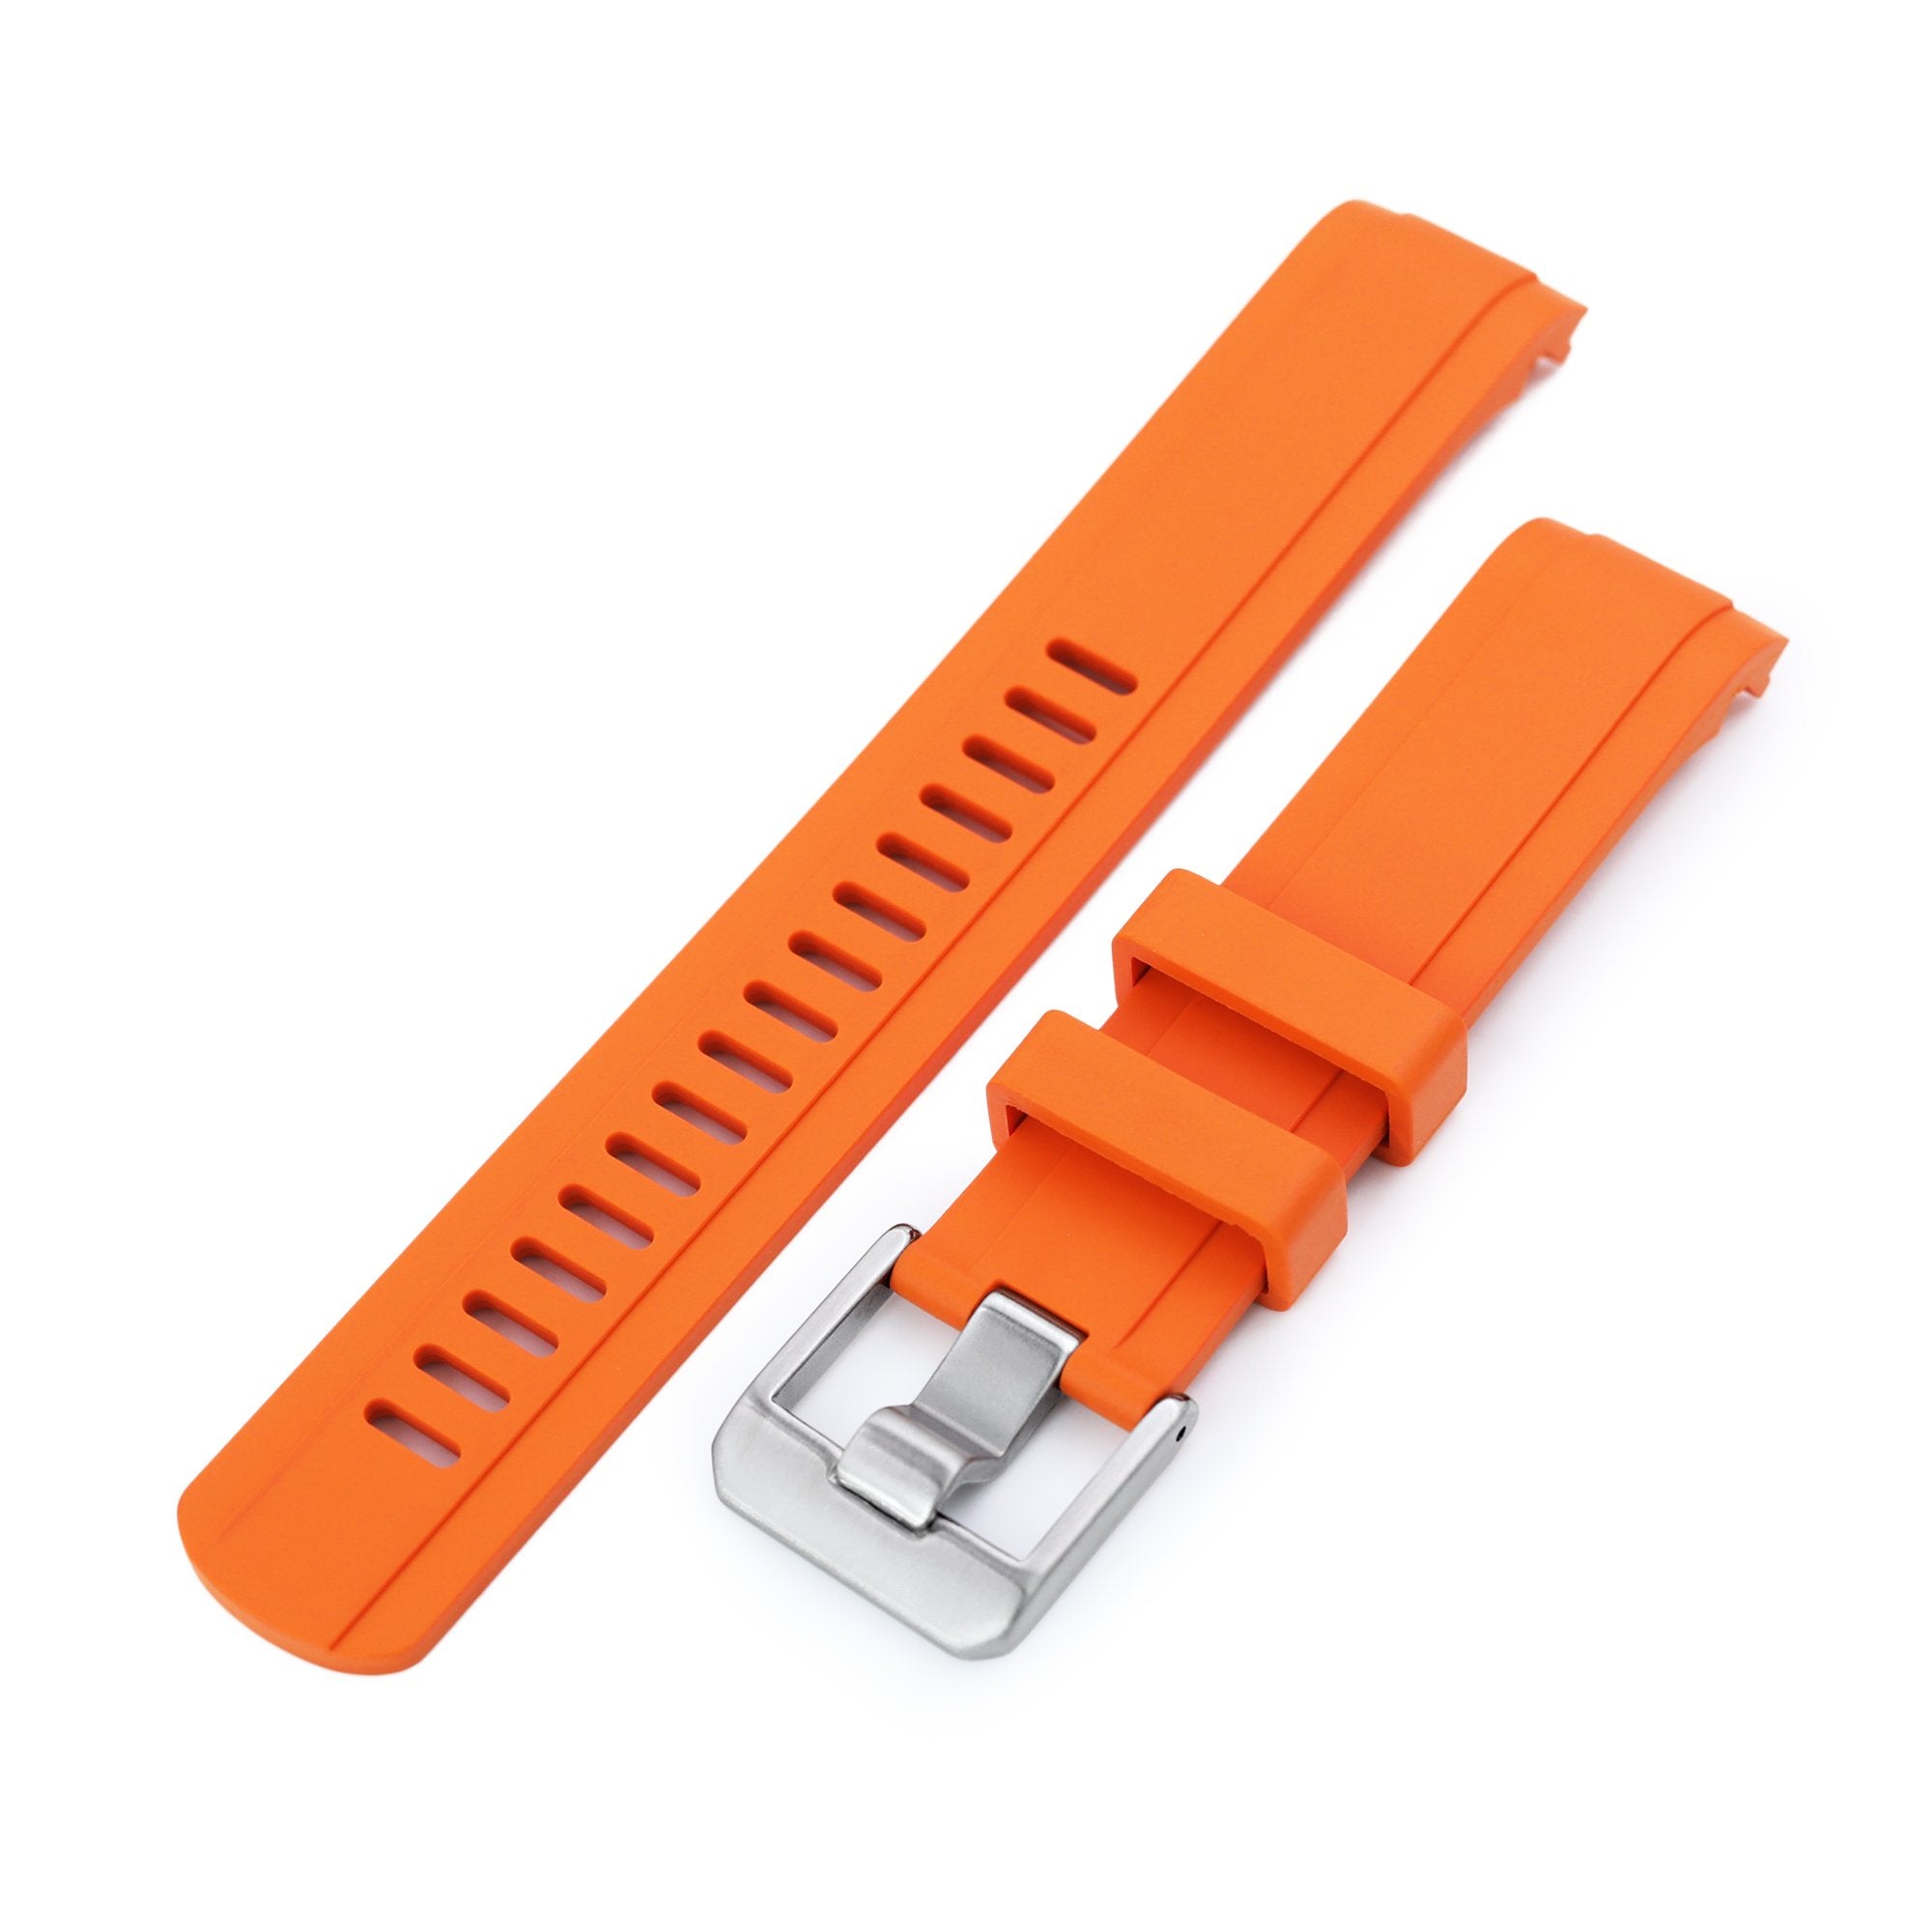 20mm Crafter Blue - Orange Rubber Curved Lug Watch Strap for Seiko Baby MM200 & Mini Turtles SRPC35 Strapcode Watch Bands